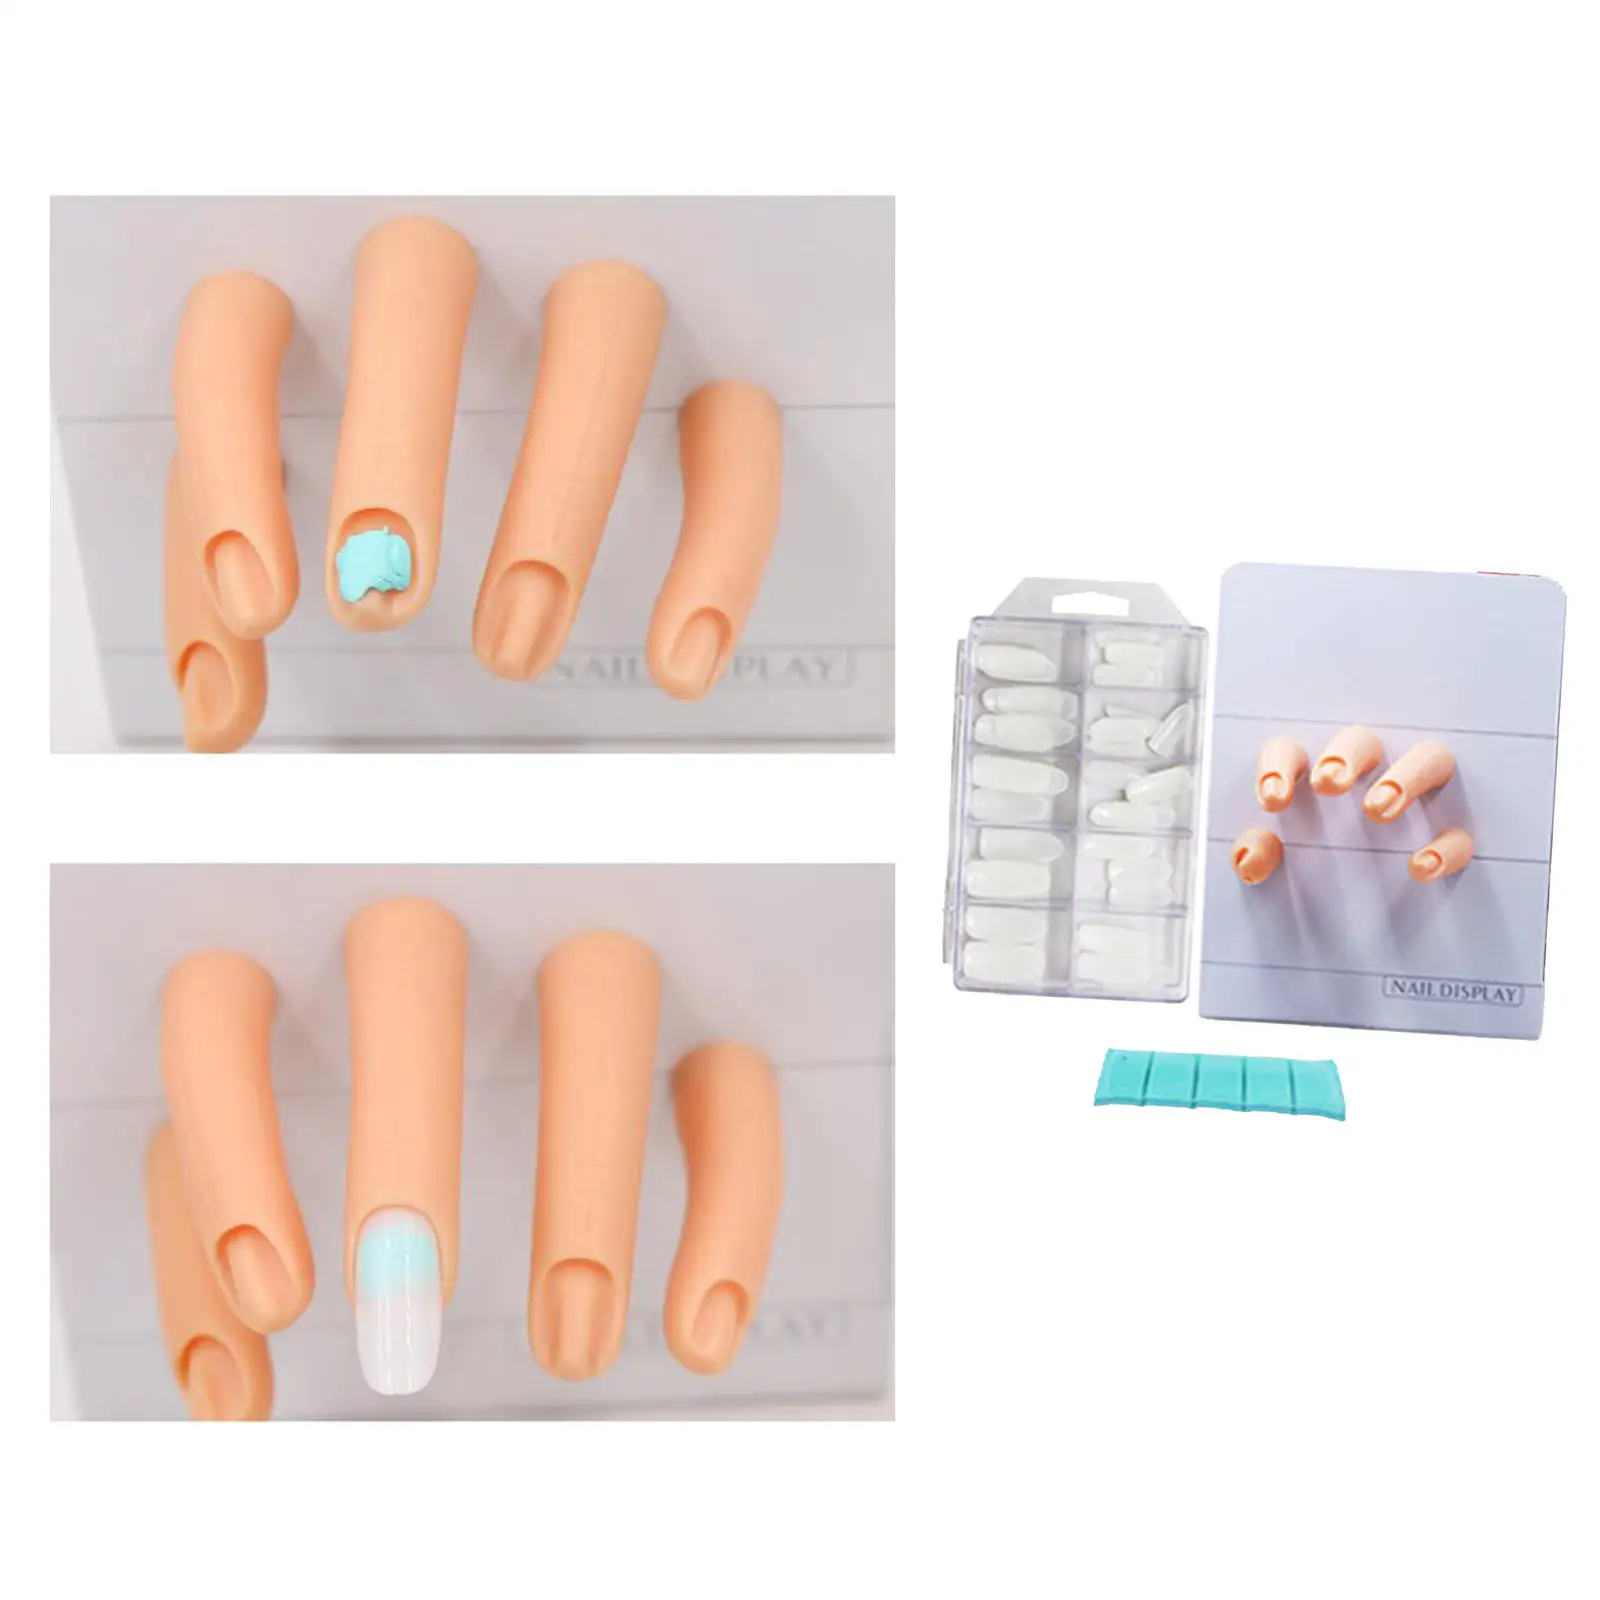 Nail Art Training Tool Magnetic Display Practice Hand for Nail Art Trainer Beginners